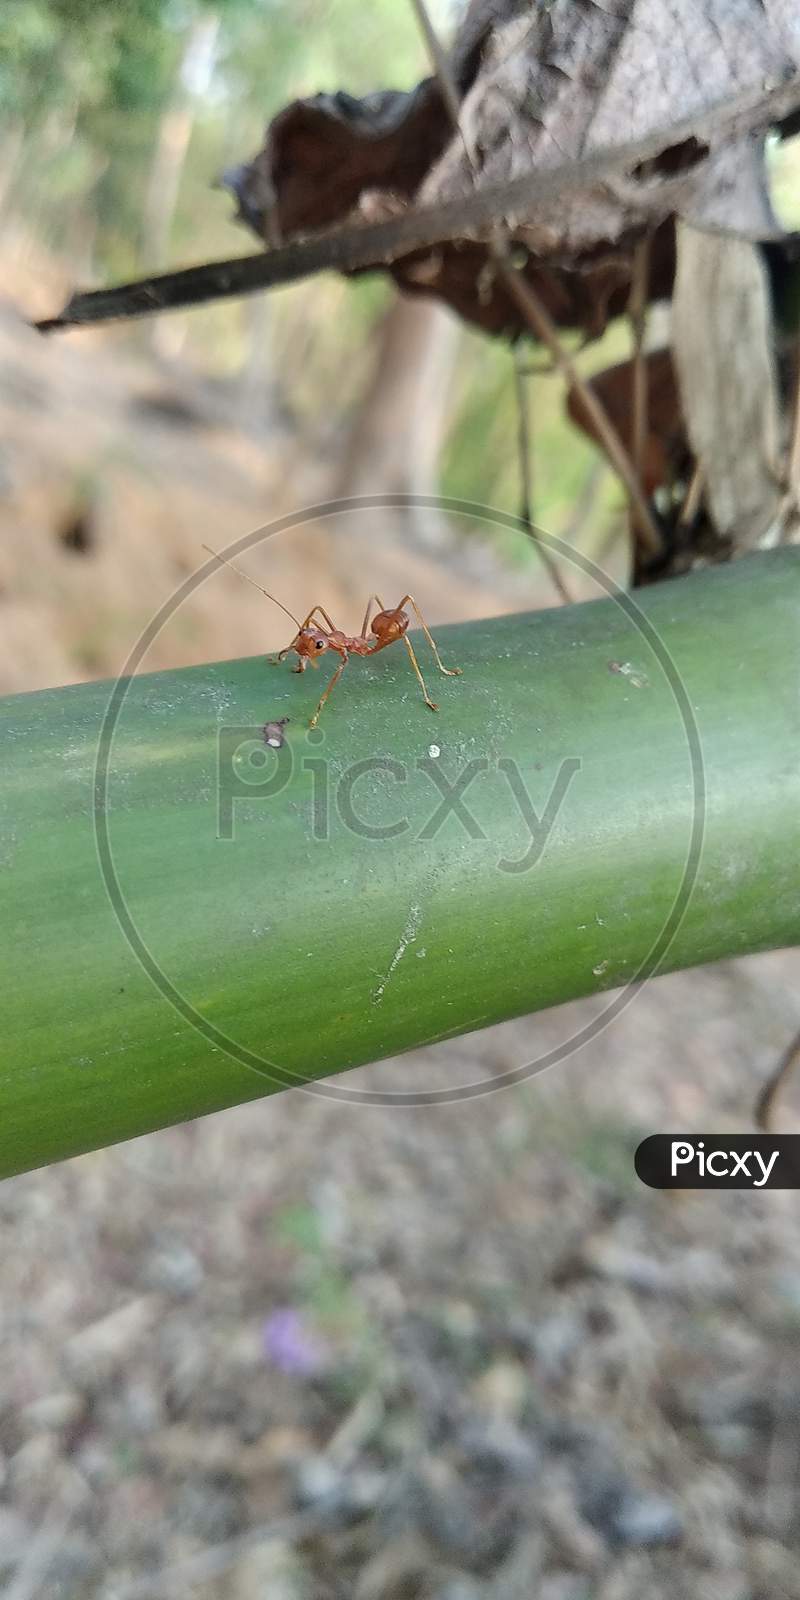 fire ants traveling above the bamboo